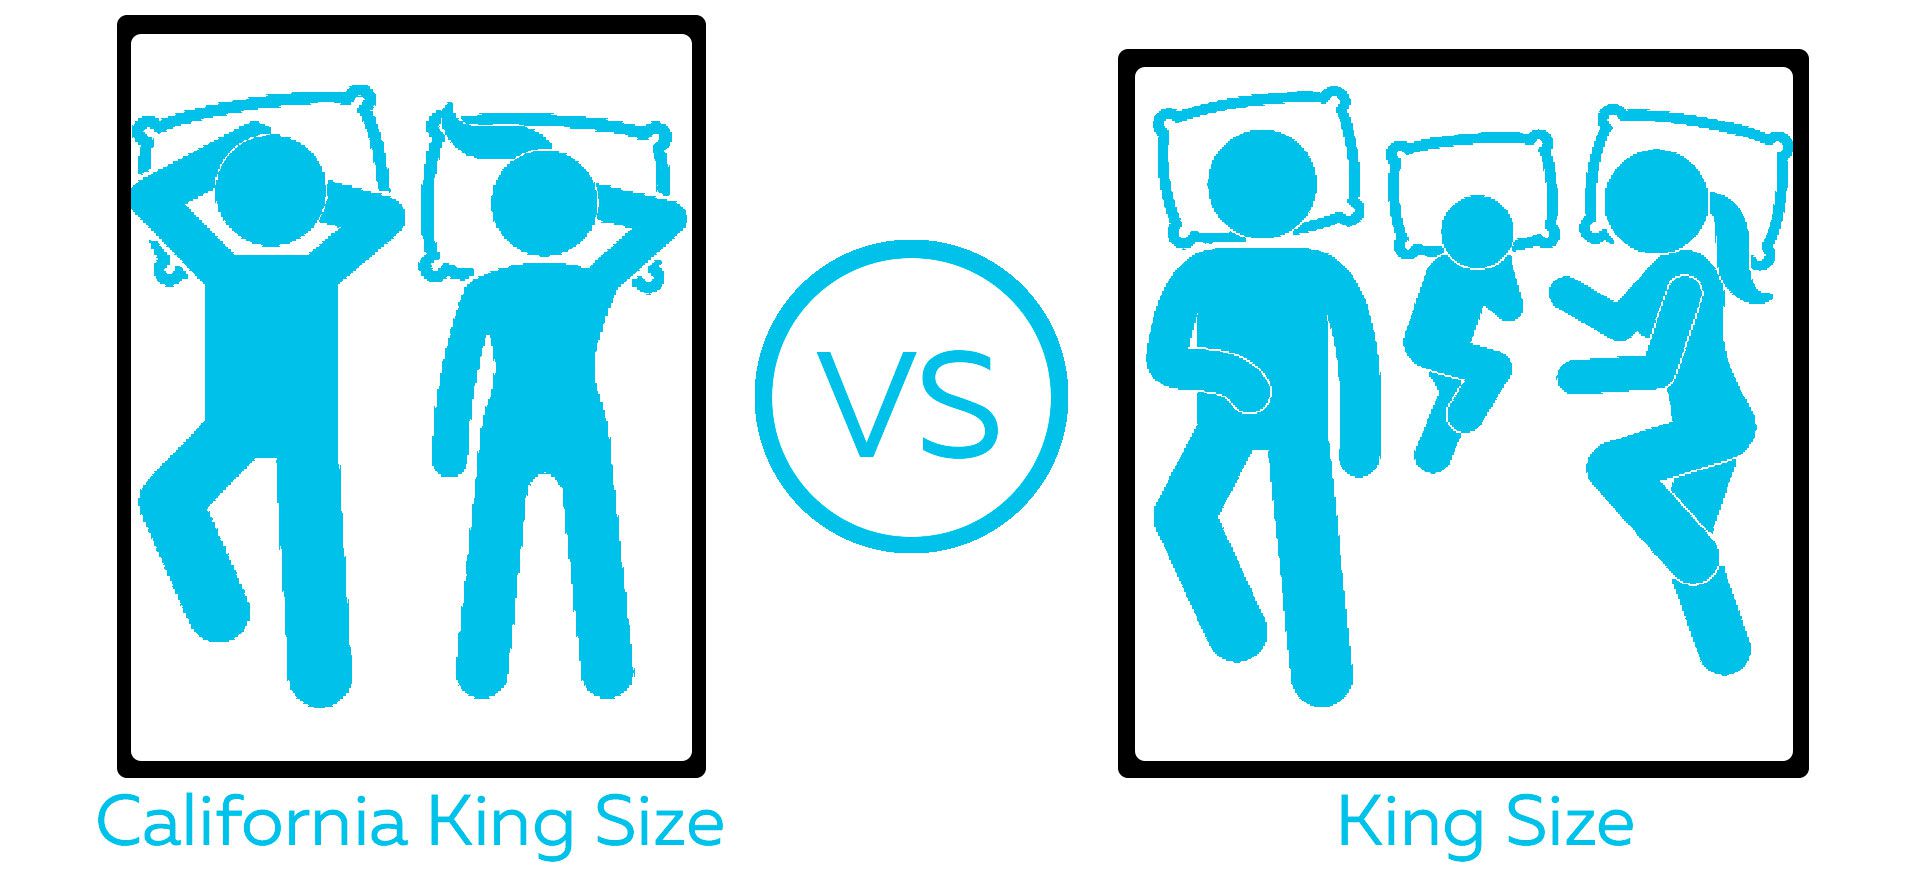 Comparison of sizes of california king and king mattresses.